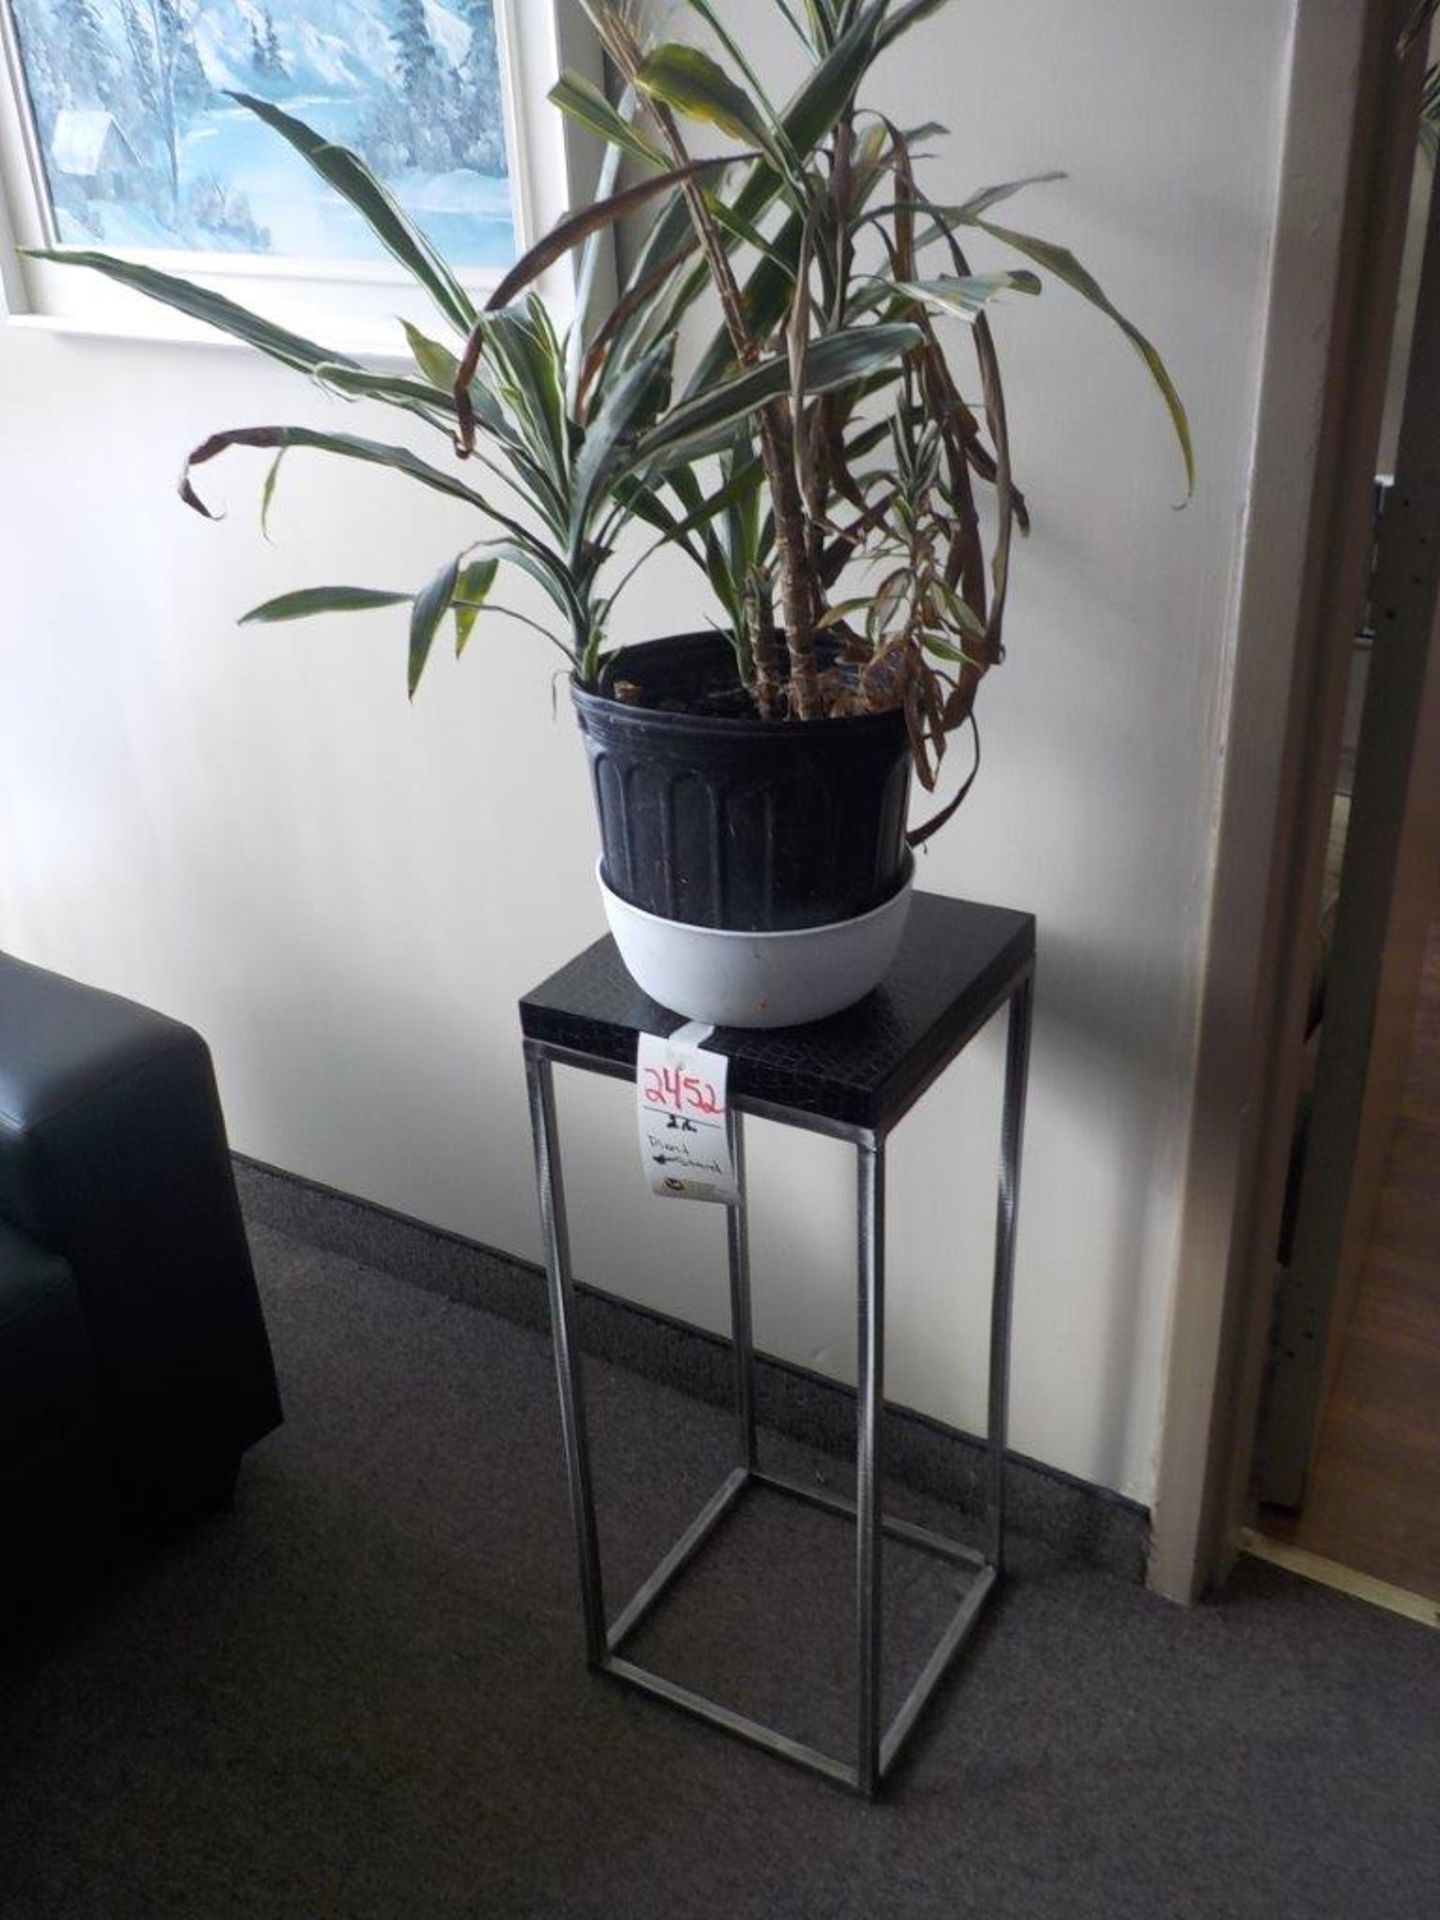 PLANT & STAND